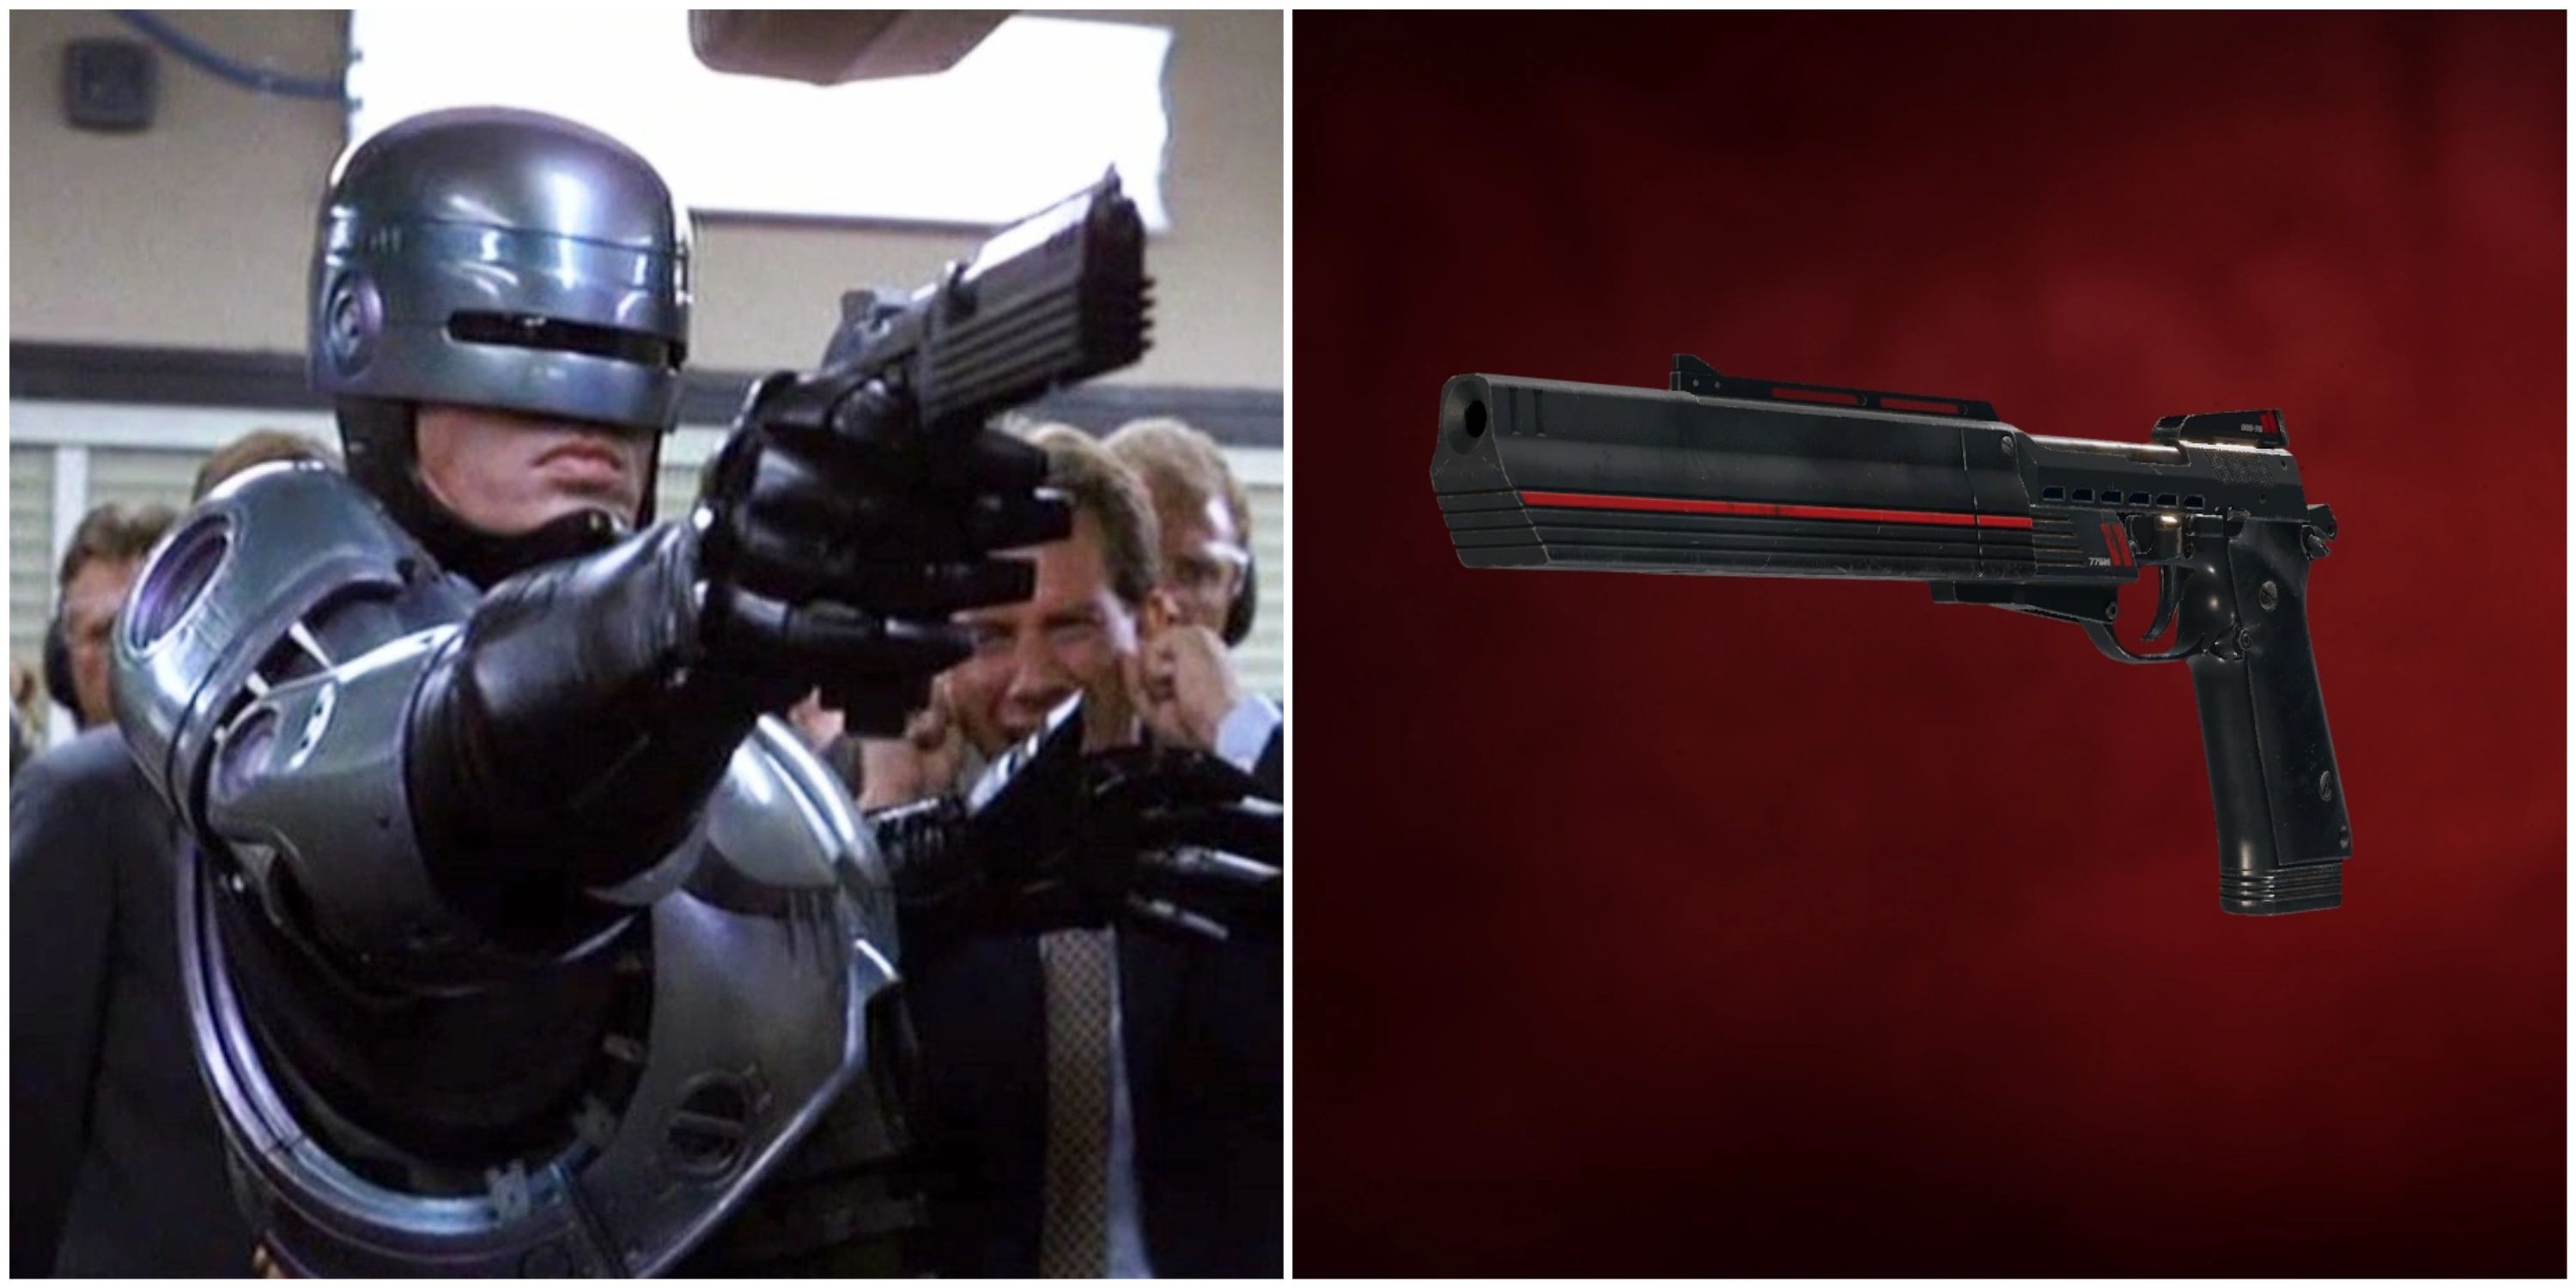 The AJM 9 in Robocop and Far Cry 6